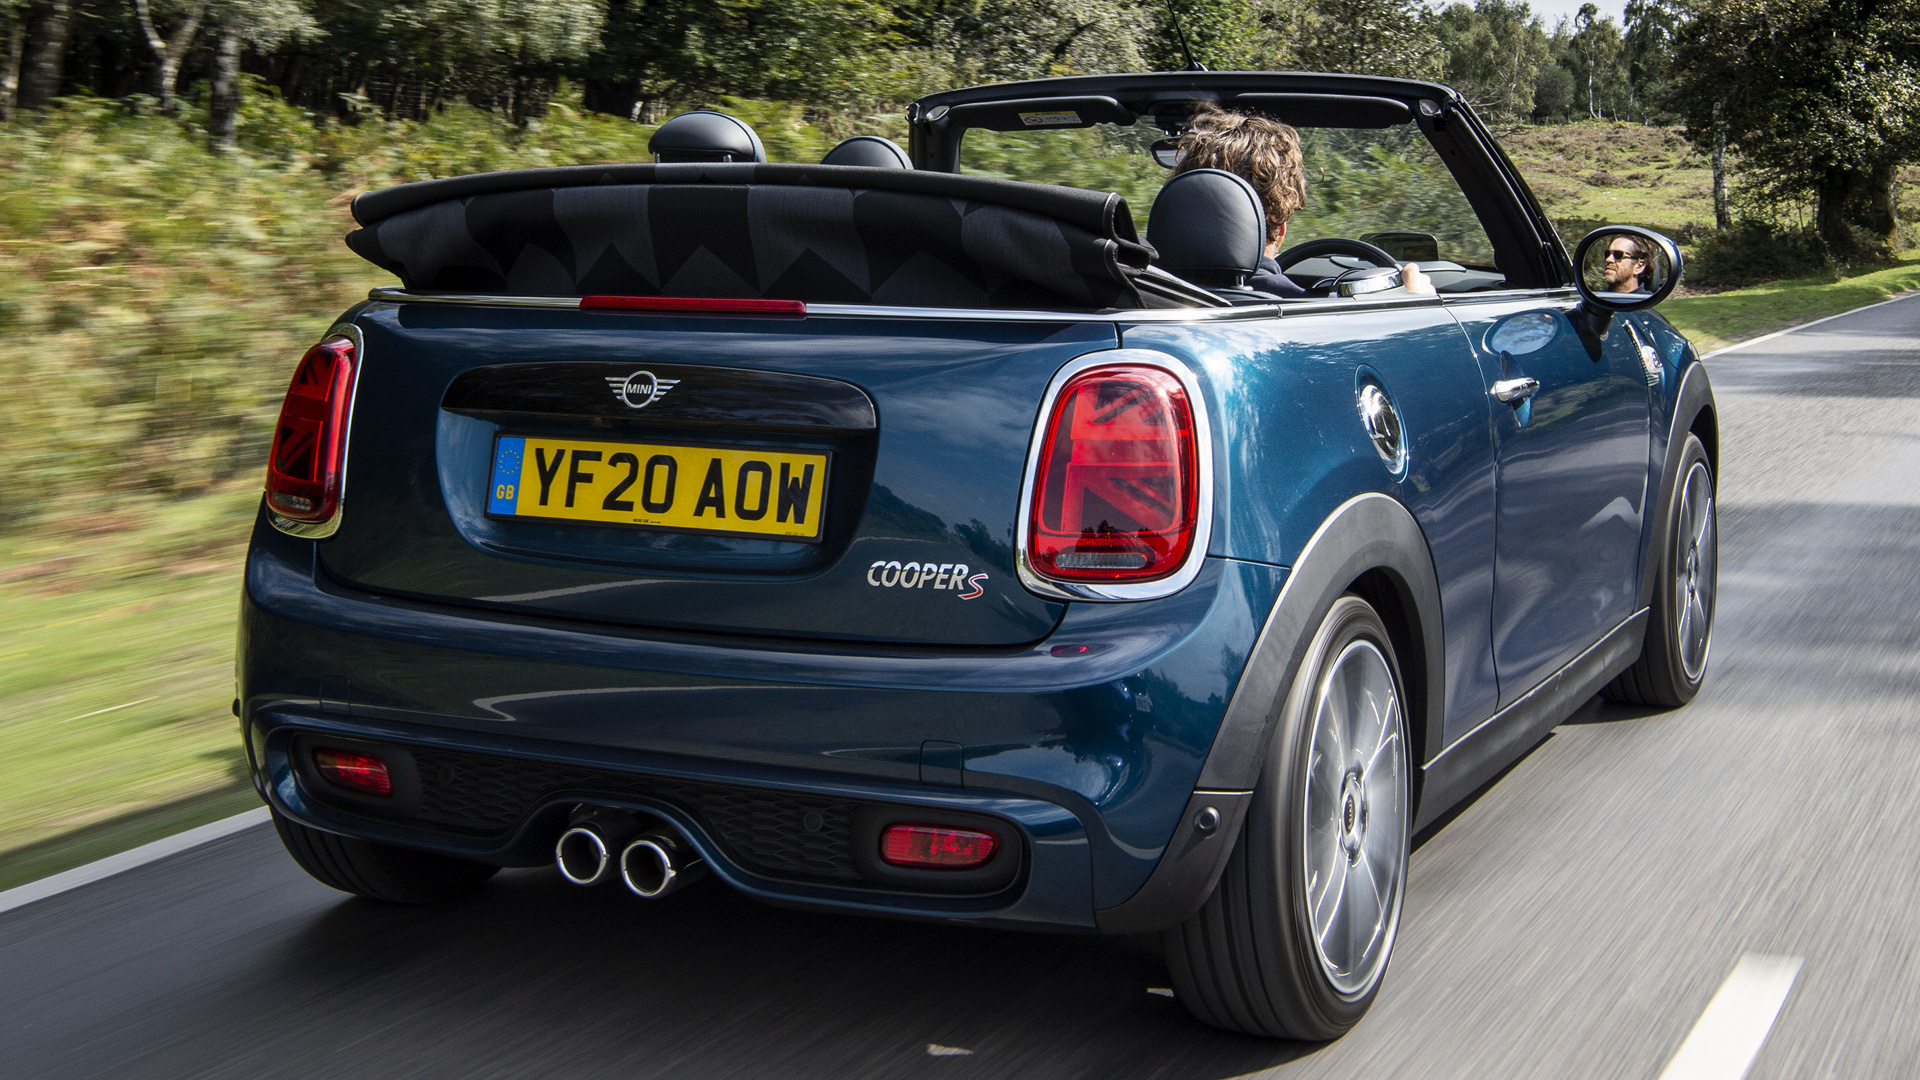 Mini Cooper S Convertible Sidewalk Uk Wallpapers And Hd Images | My XXX ...